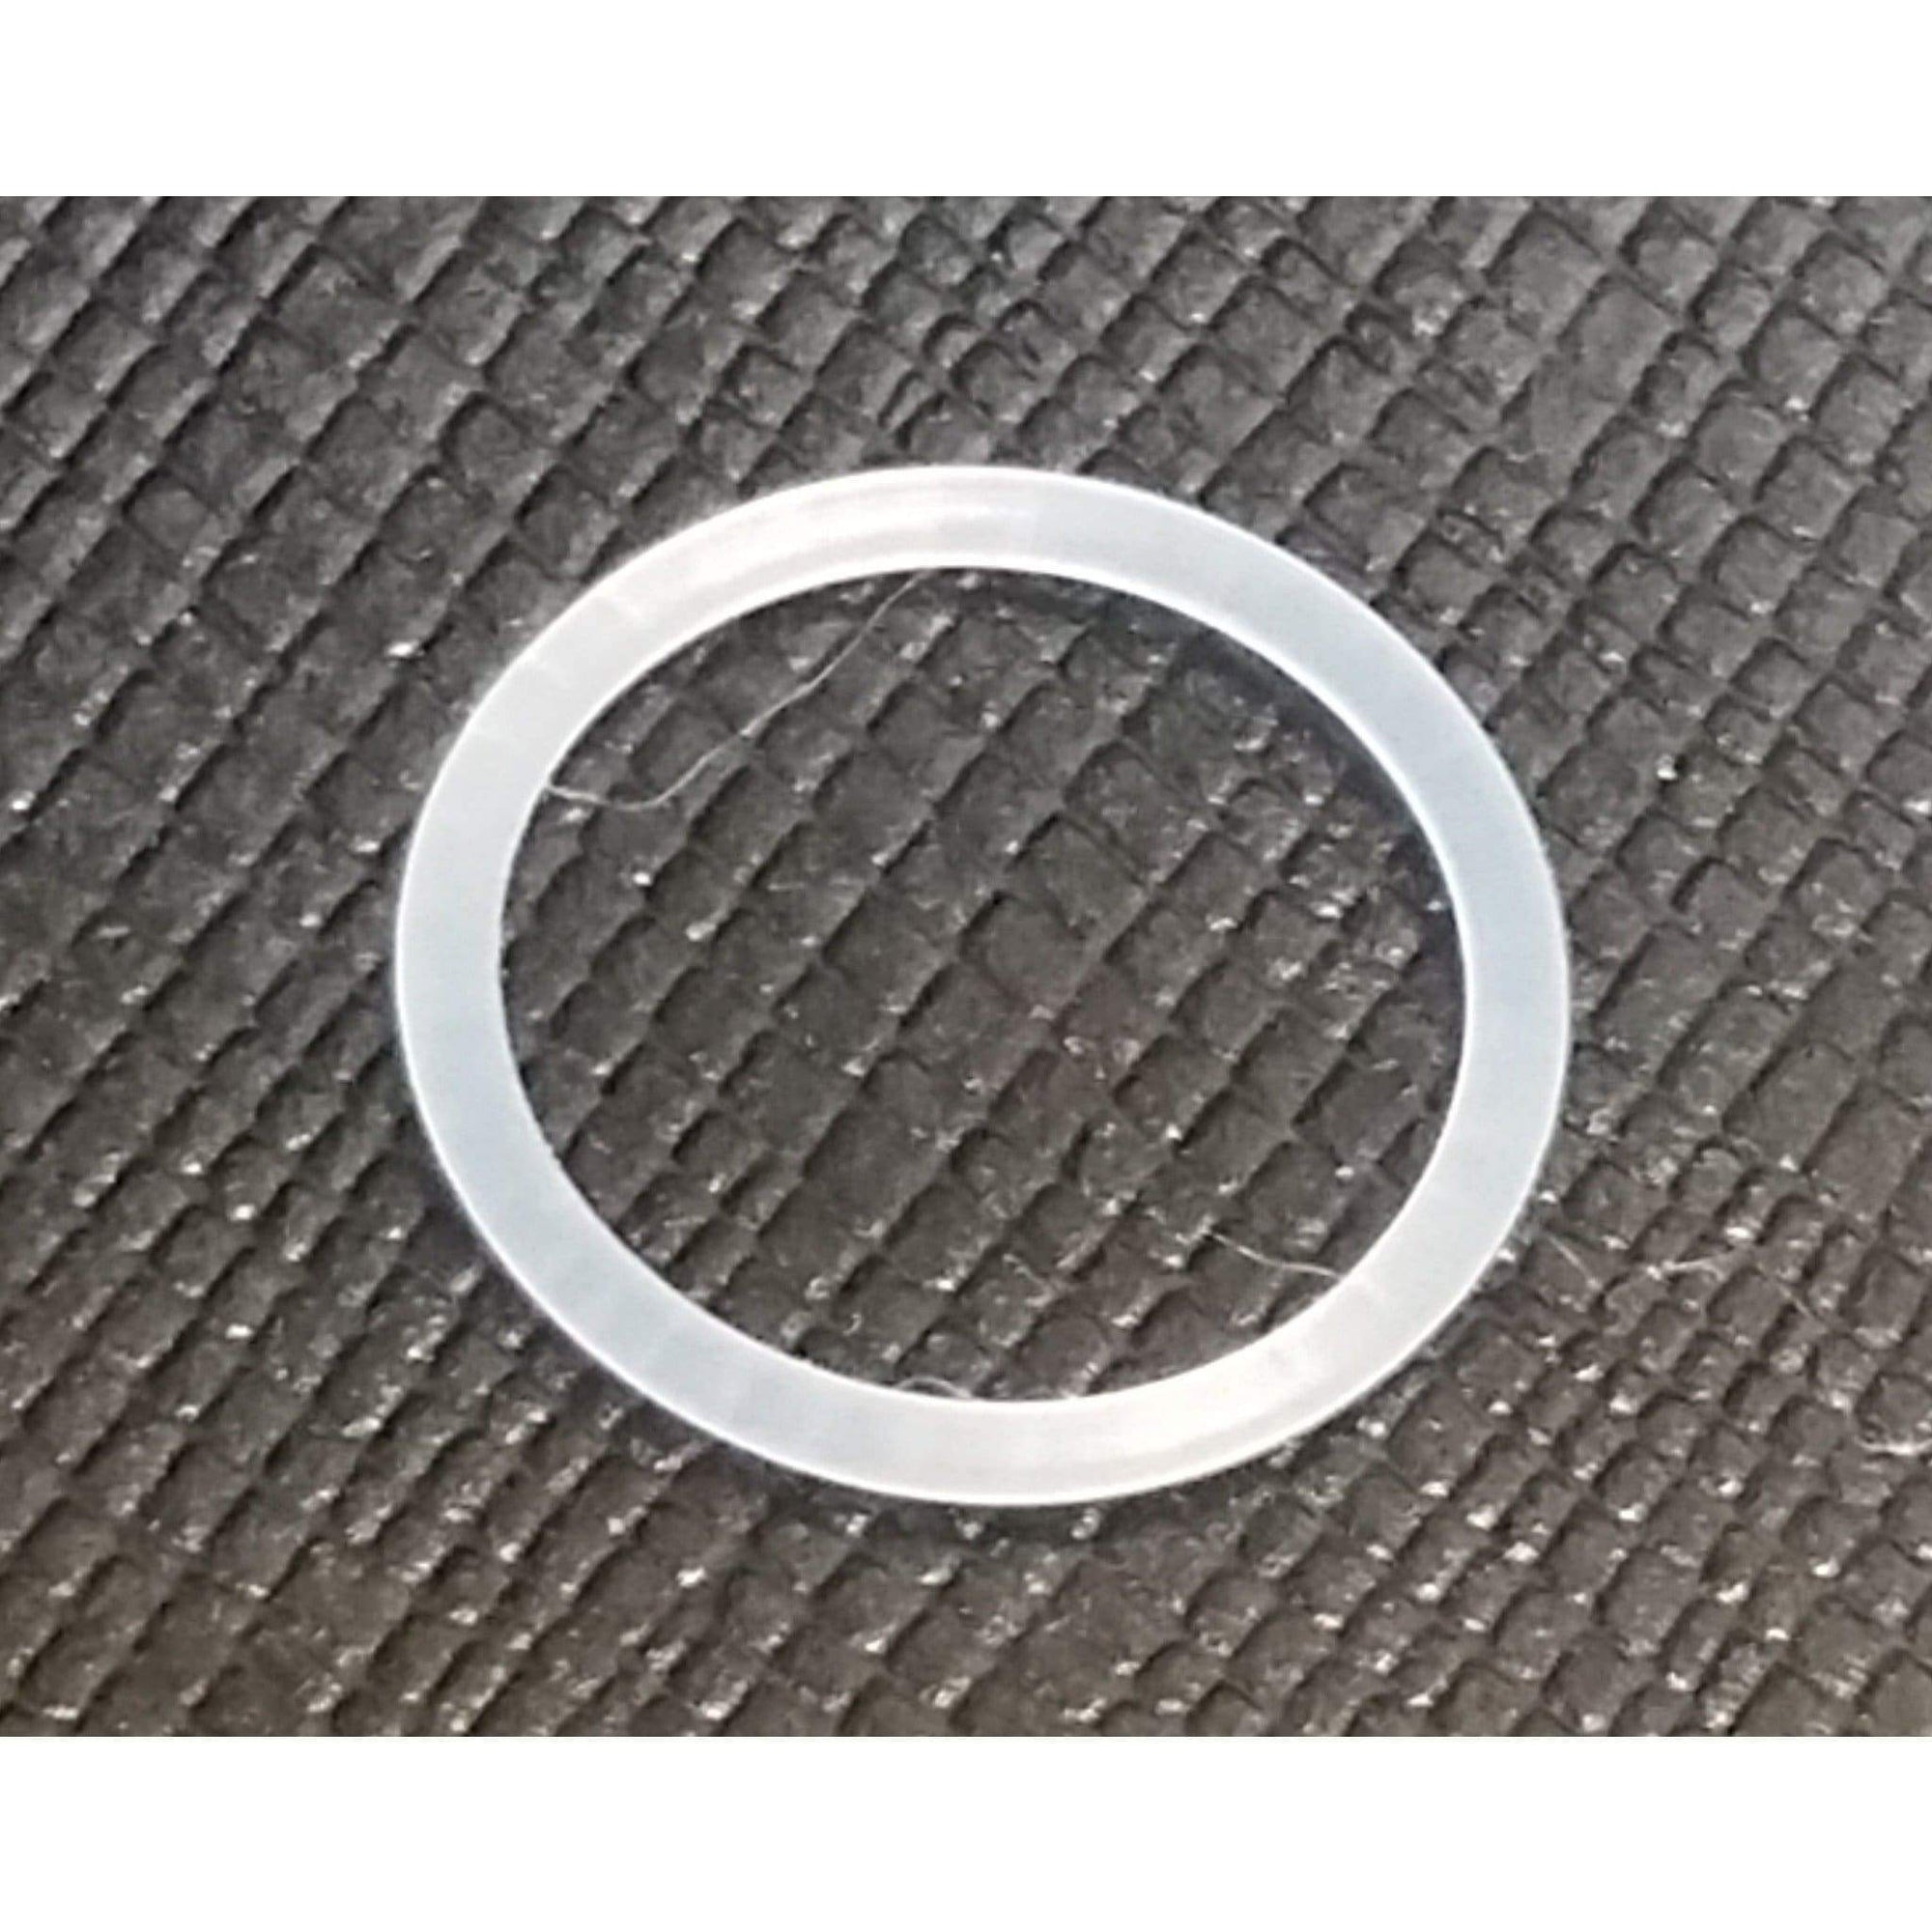 TFV12 Replacement Seals Inside Tube Oring Seals/Oring's